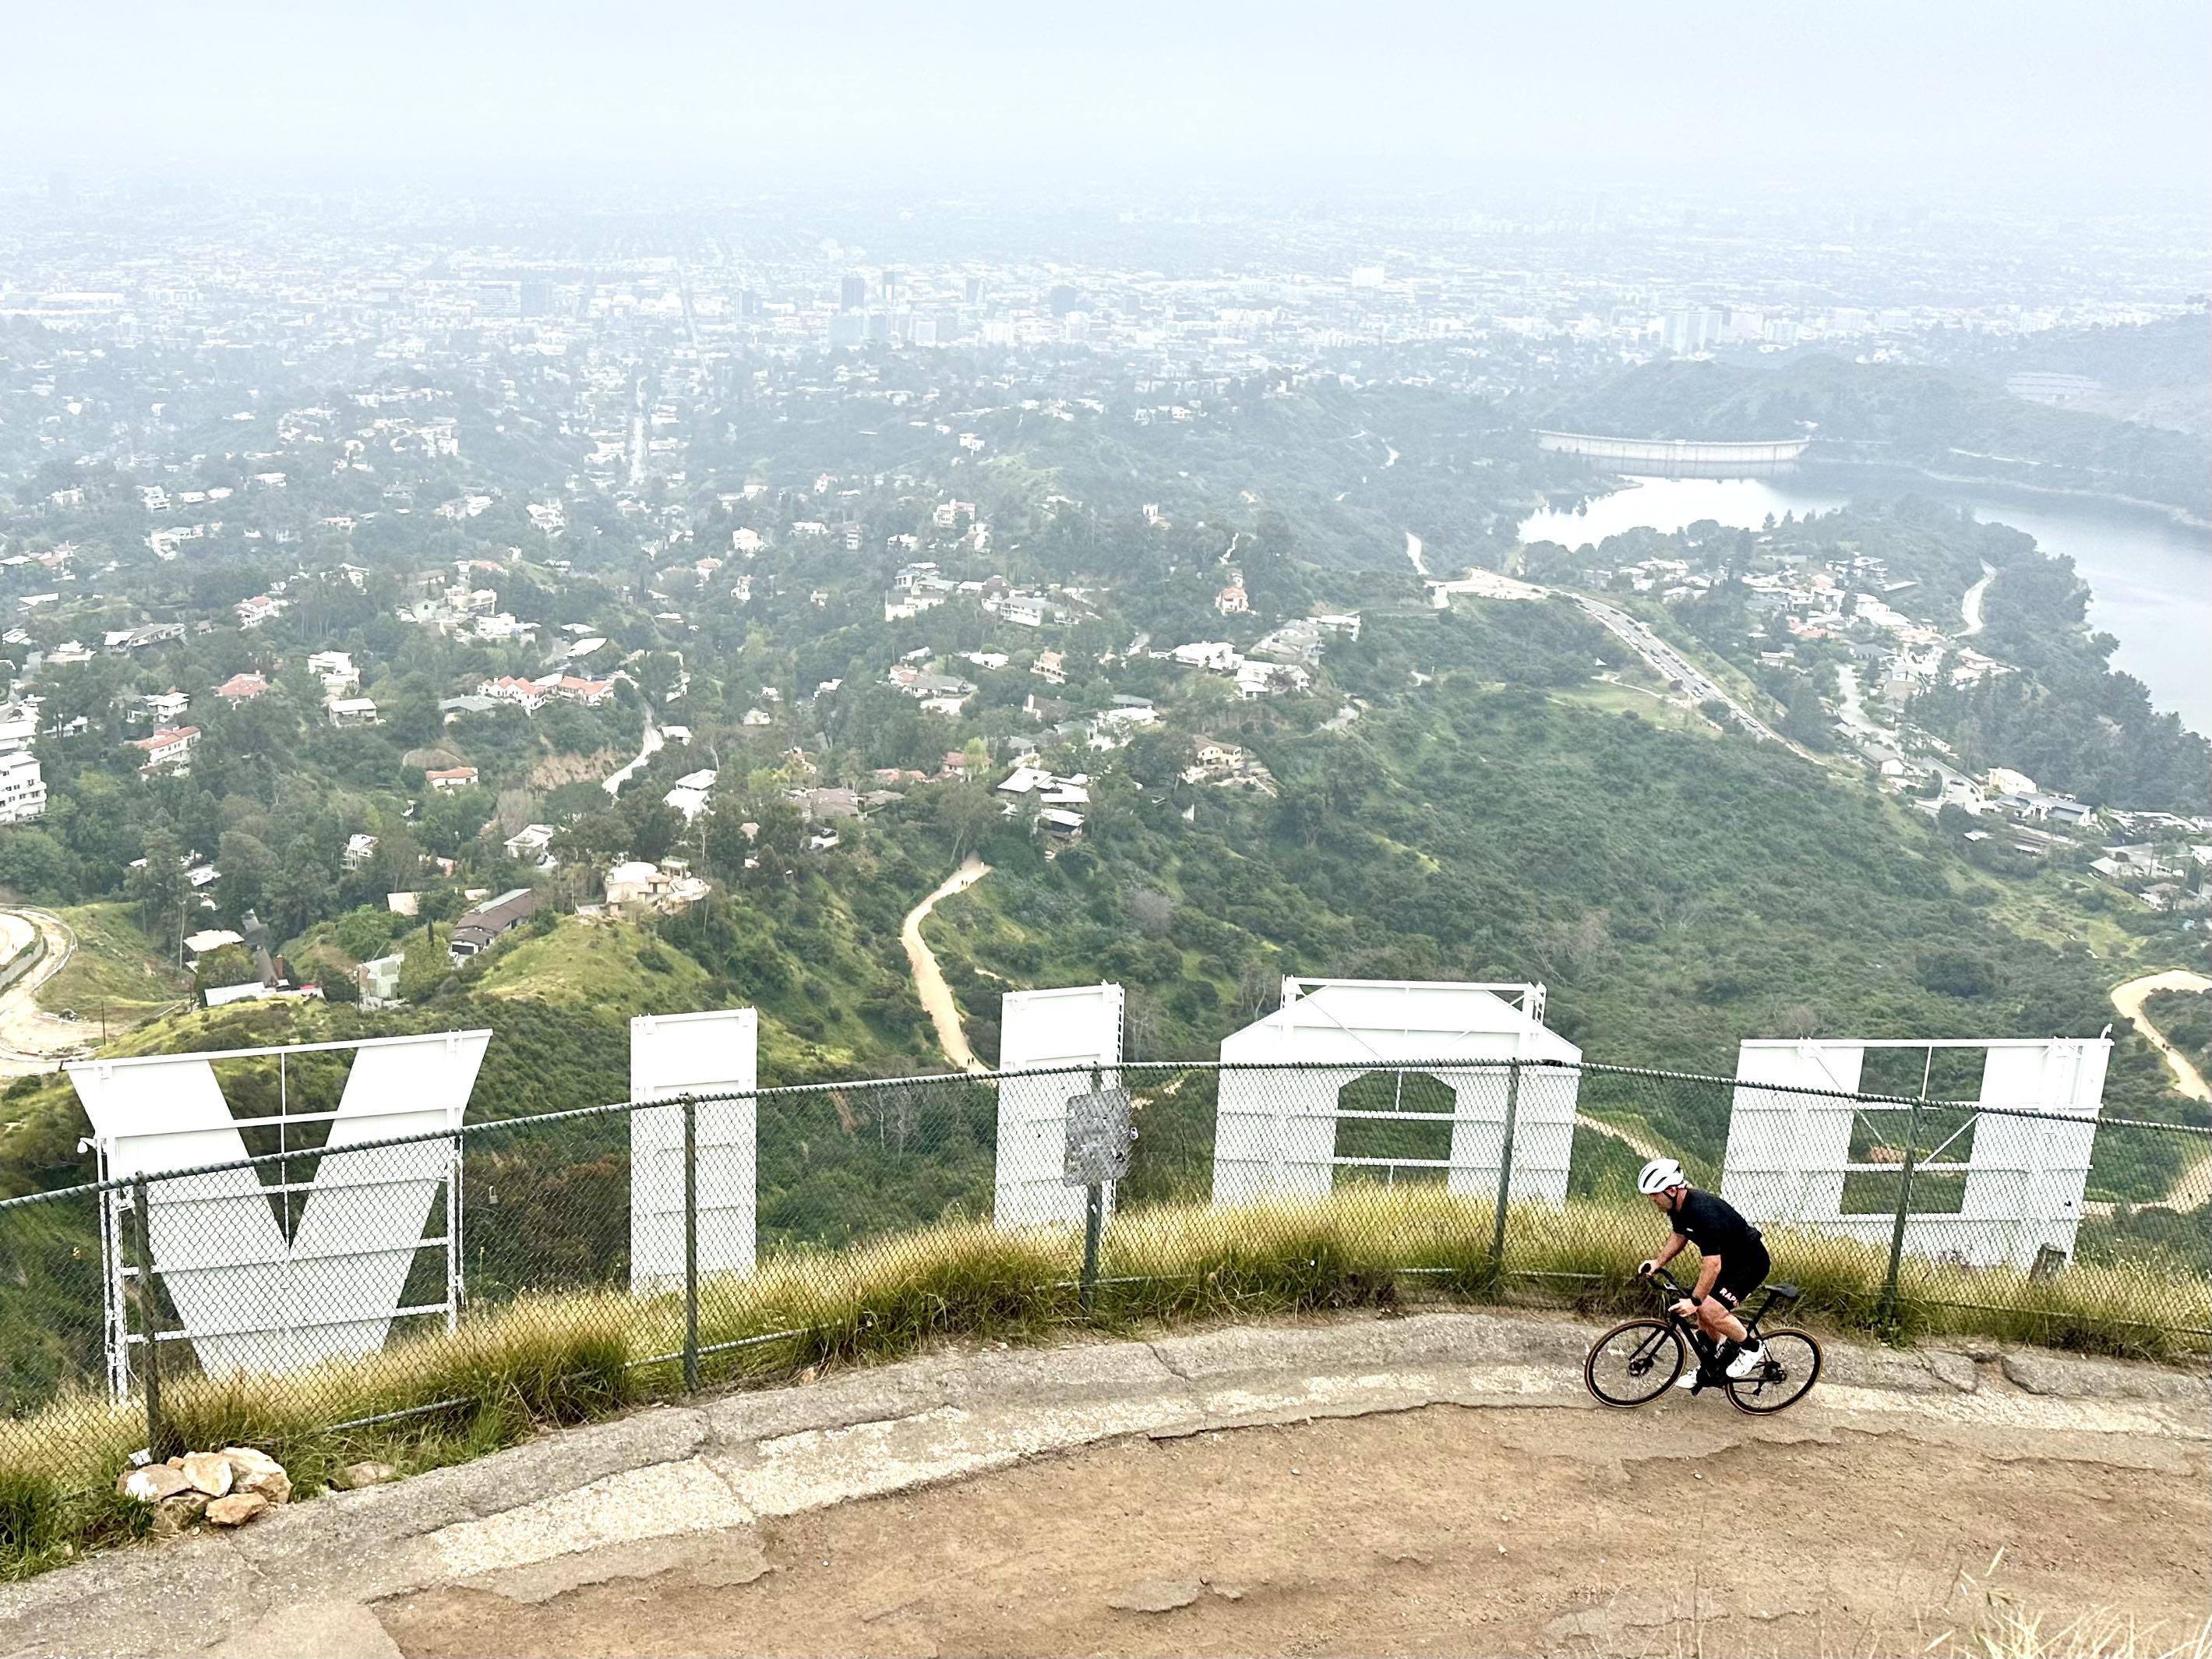 Cycling up to the Hollywood sign is a must